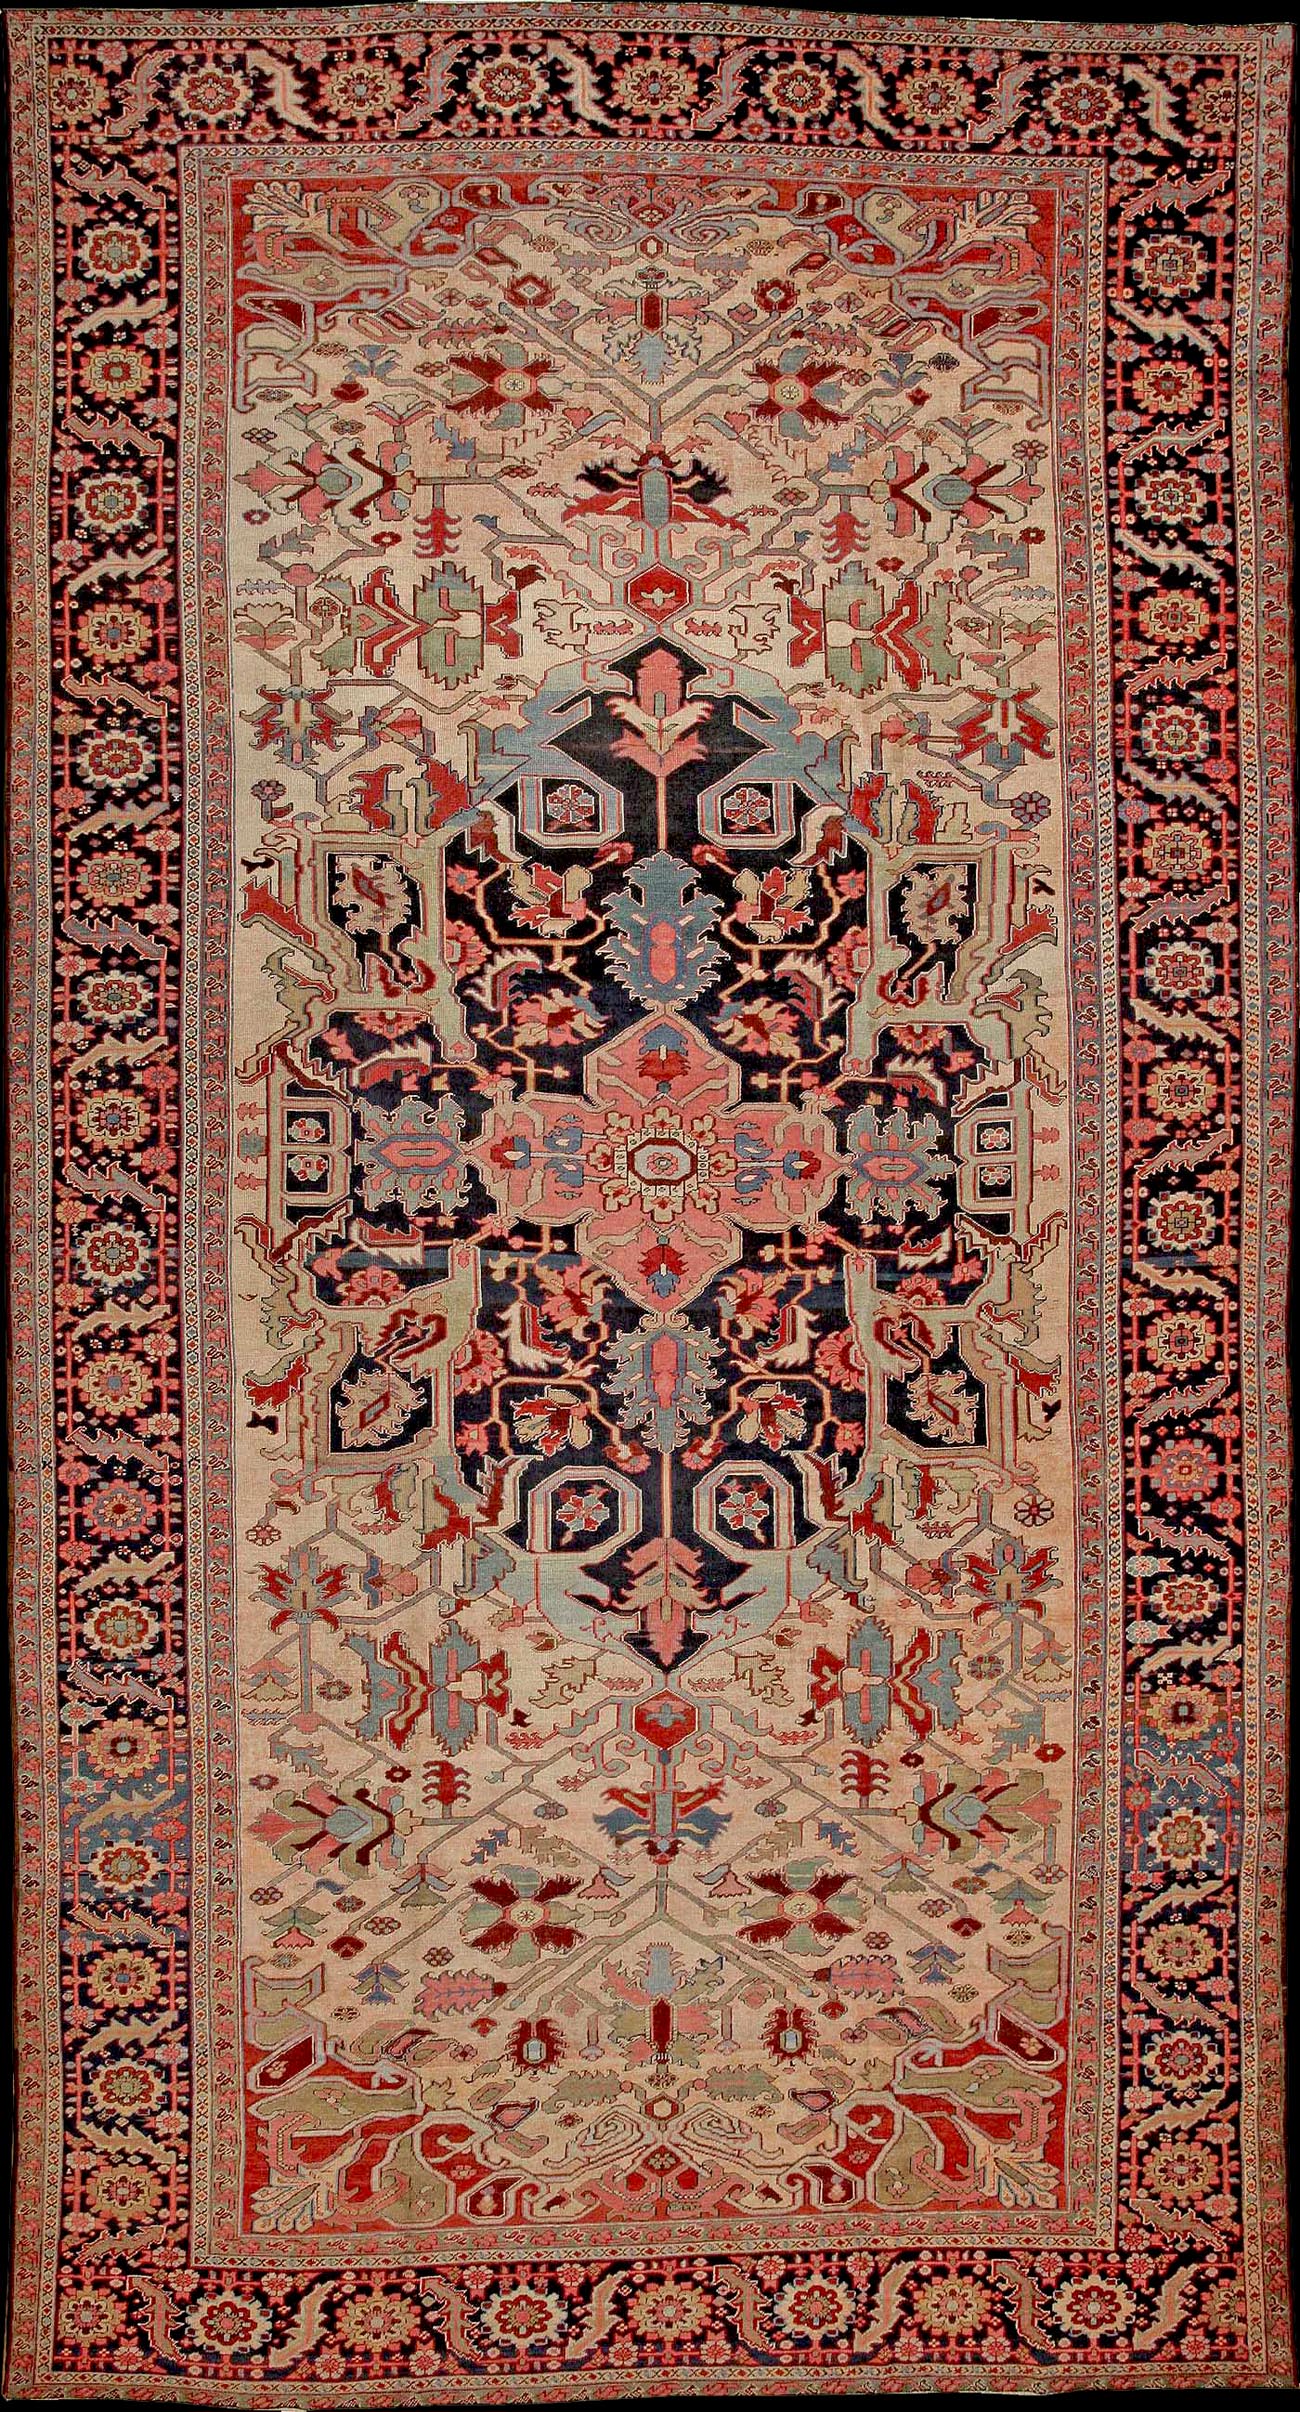 ~WELCOME TO SOURCE OF ANTIQUE RUGS~